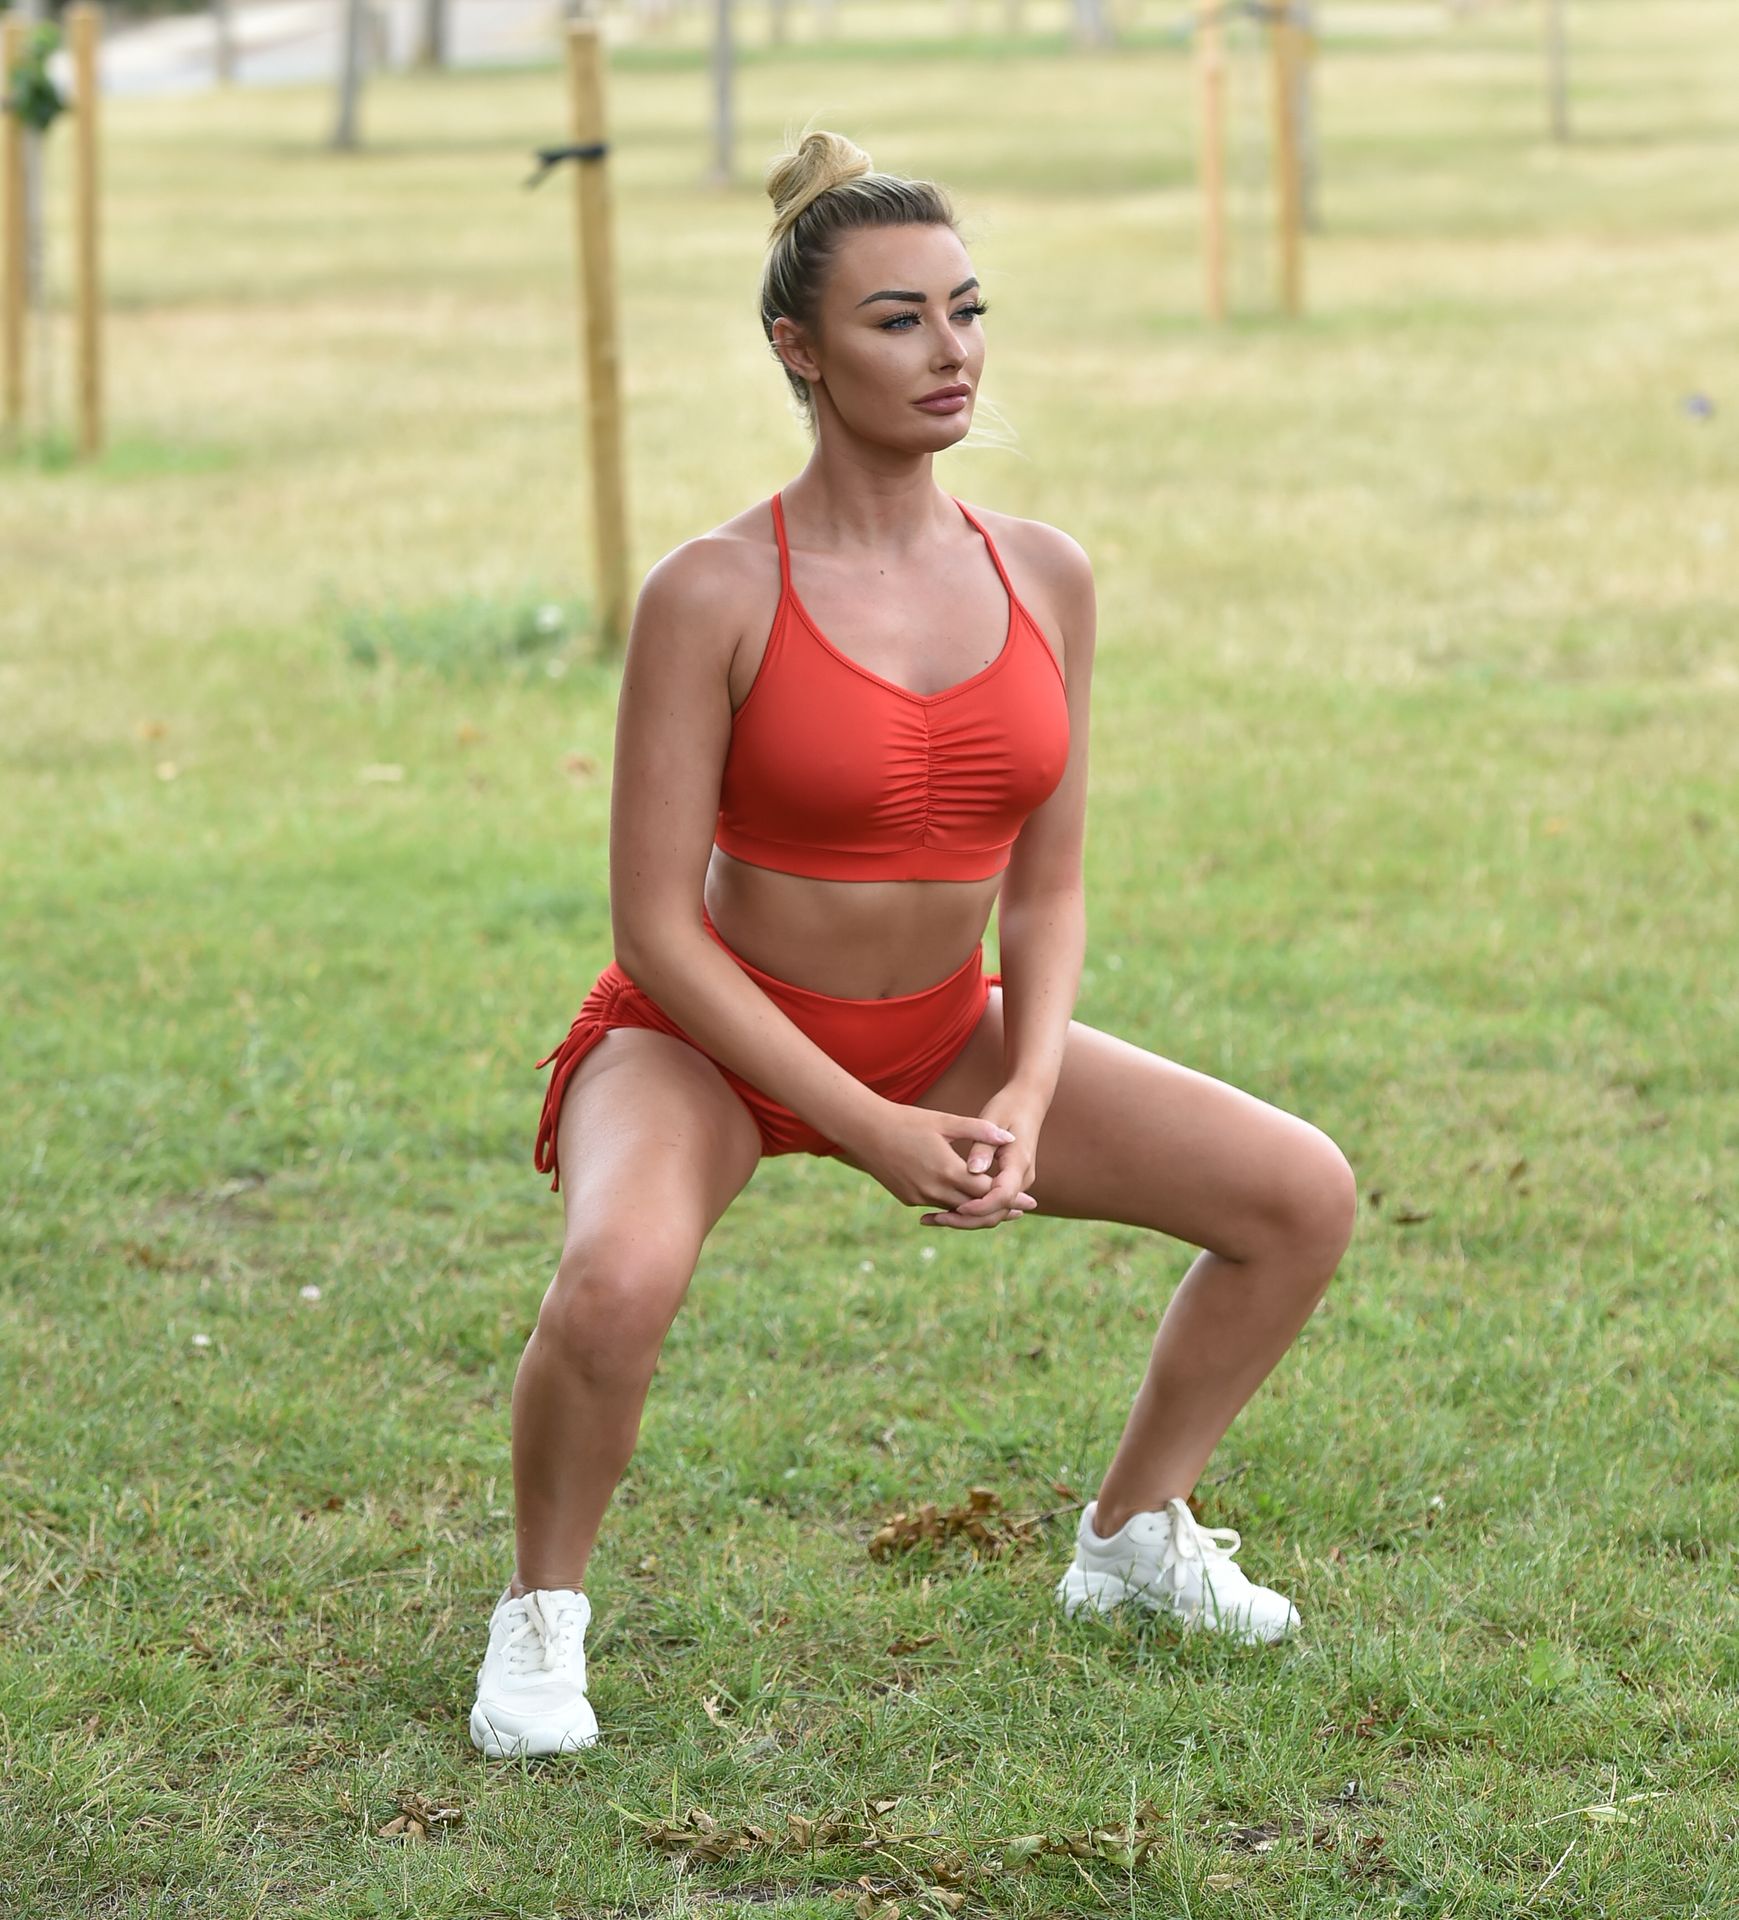 Chloe Crowhurst Is Seen Doing Her Morning Work Out In Chigwell (19 Photos)